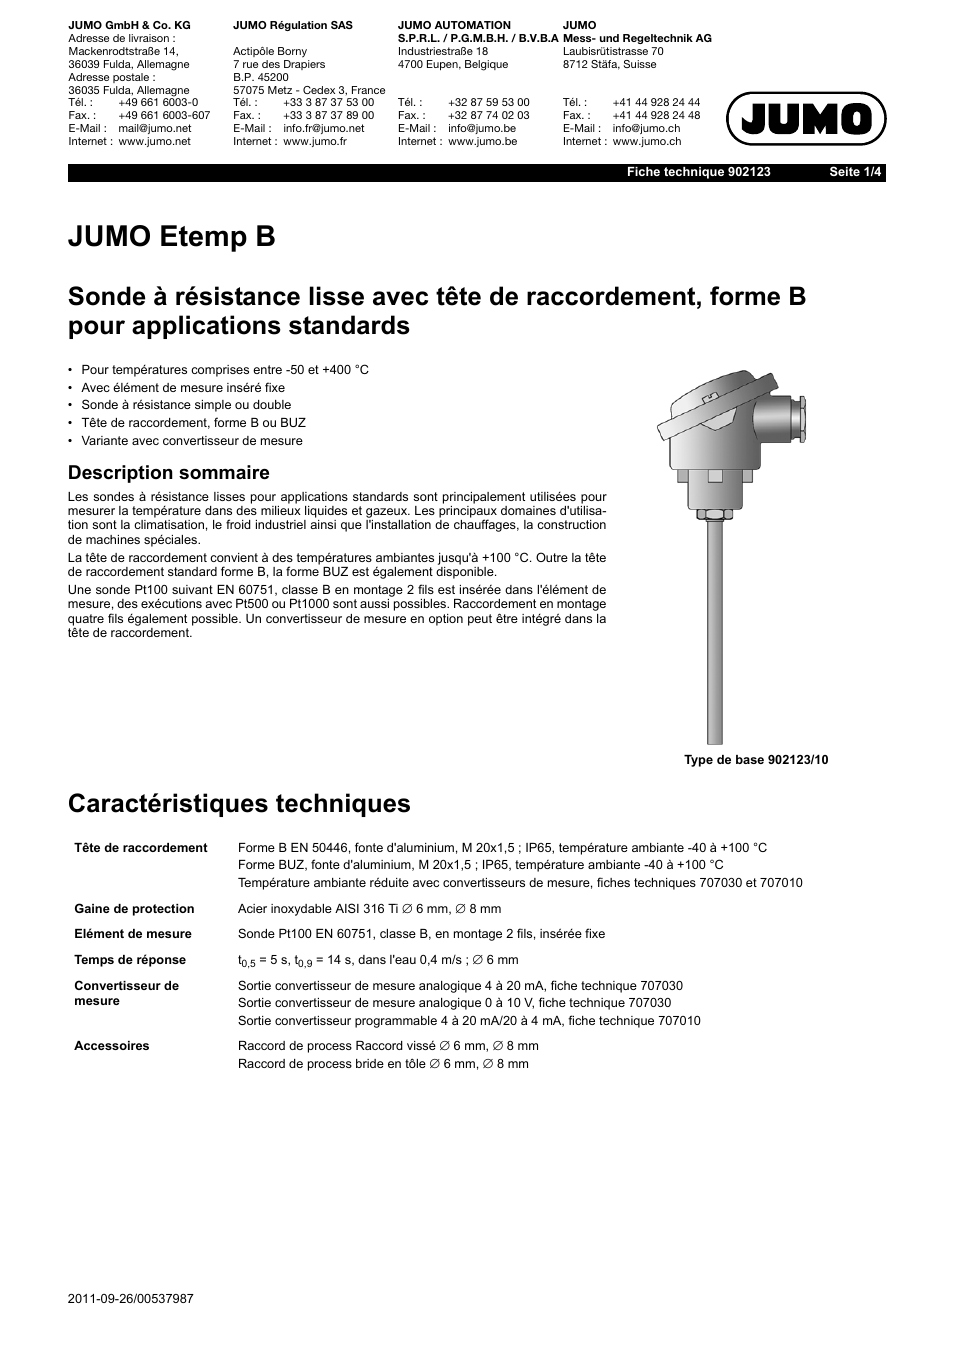 JUMO 902123 Etemp B Push-In RTD Temperature Probe with Terminal Head Form B for Standard Applications Data Sheet Manuel d'utilisation | Pages: 4